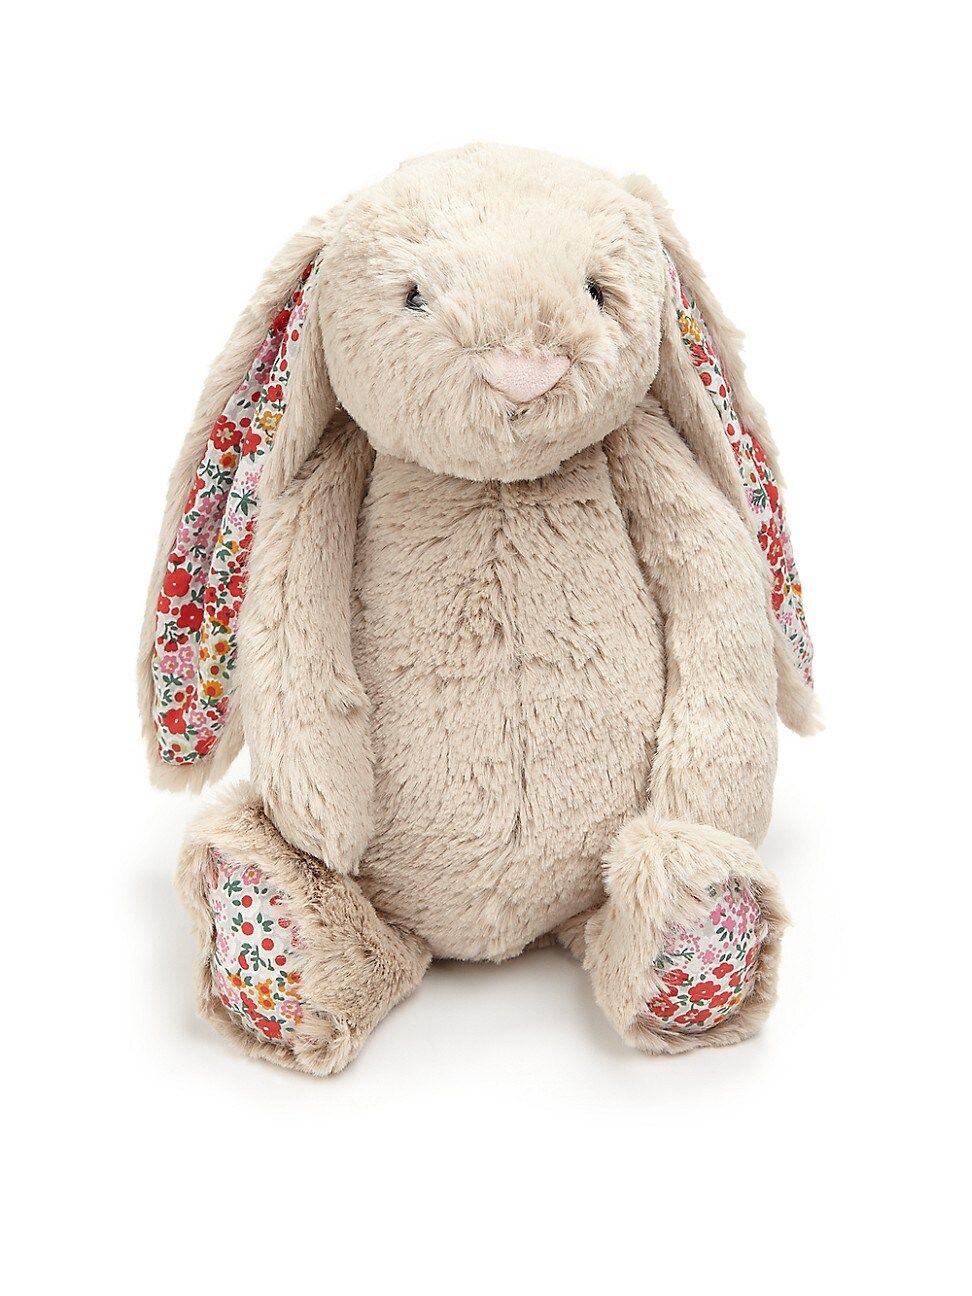 Blossom Bunny Posey Plush Toy | Saks Fifth Avenue